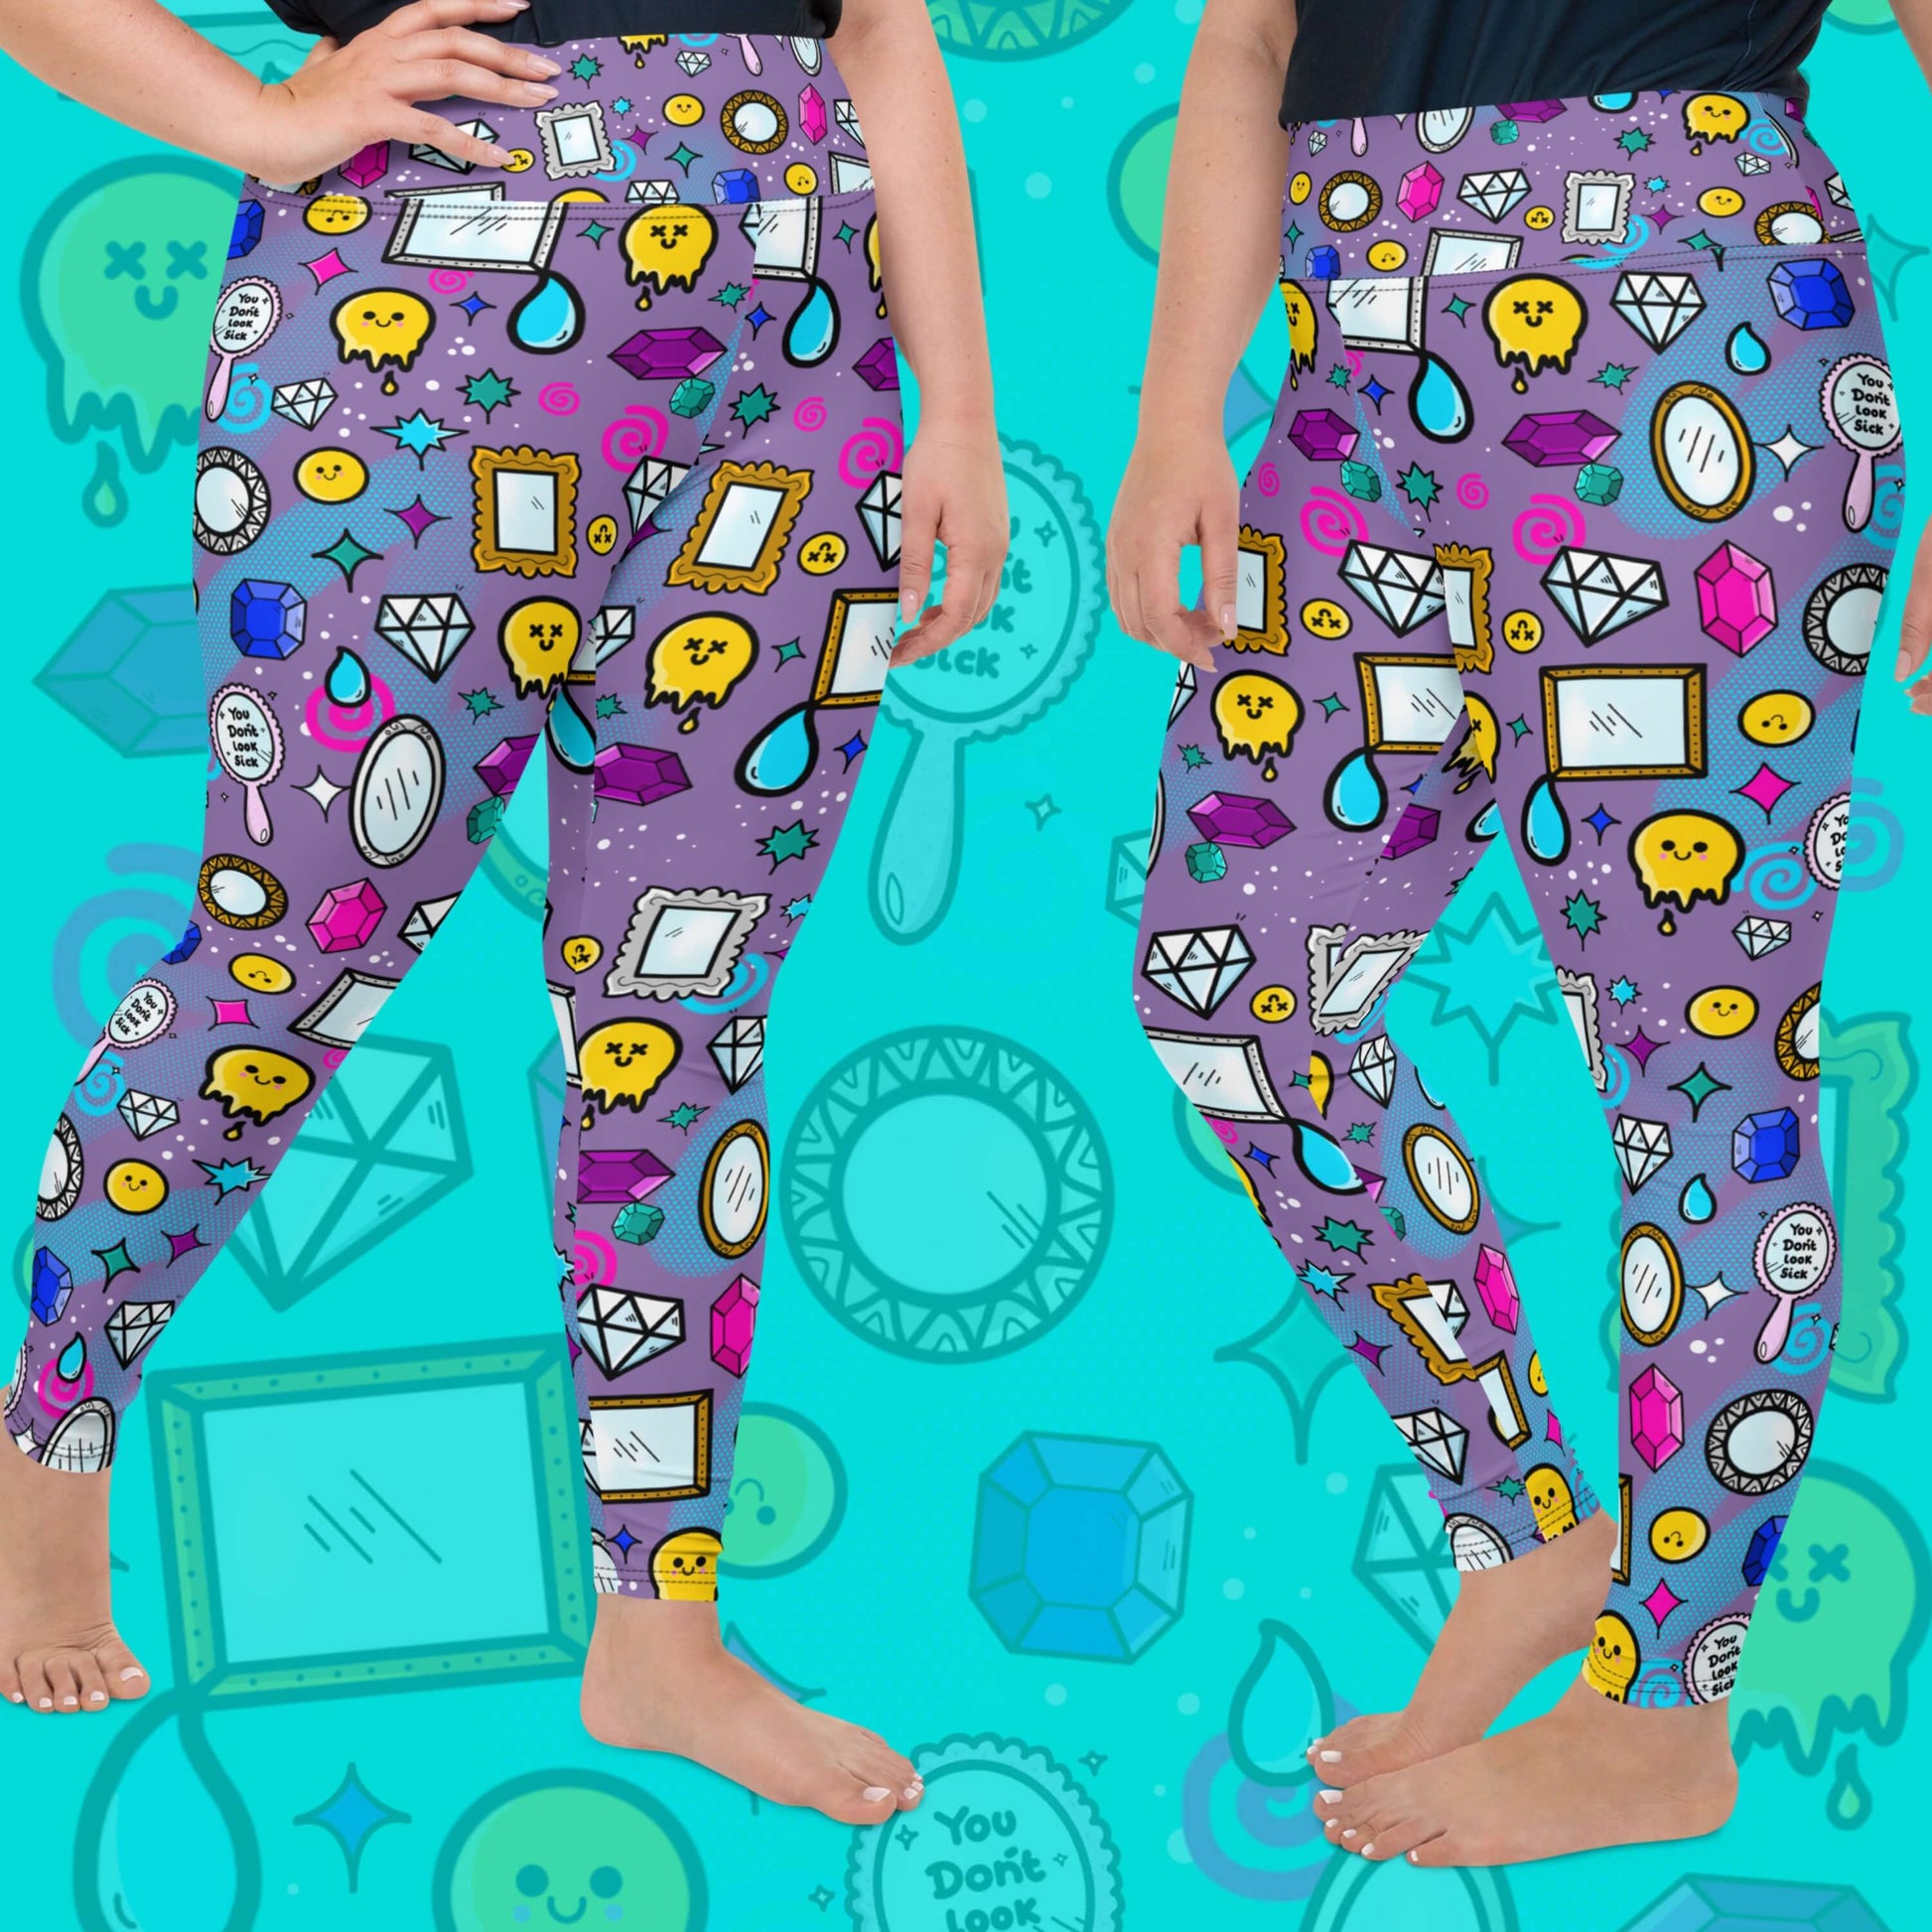 The You Don't Look Sick Plus Size Leggings modelled by a femme person wearing a black tee on a blue background with a faded version of the print. The purple base leggings features melting yellow smiley faces, mirrors, gemstones, teardrops, sparkles, swirls and dots with a centre hand held mirror reading 'you don't look sick'. The hand drawn design is raising awareness for invisible illnesses.